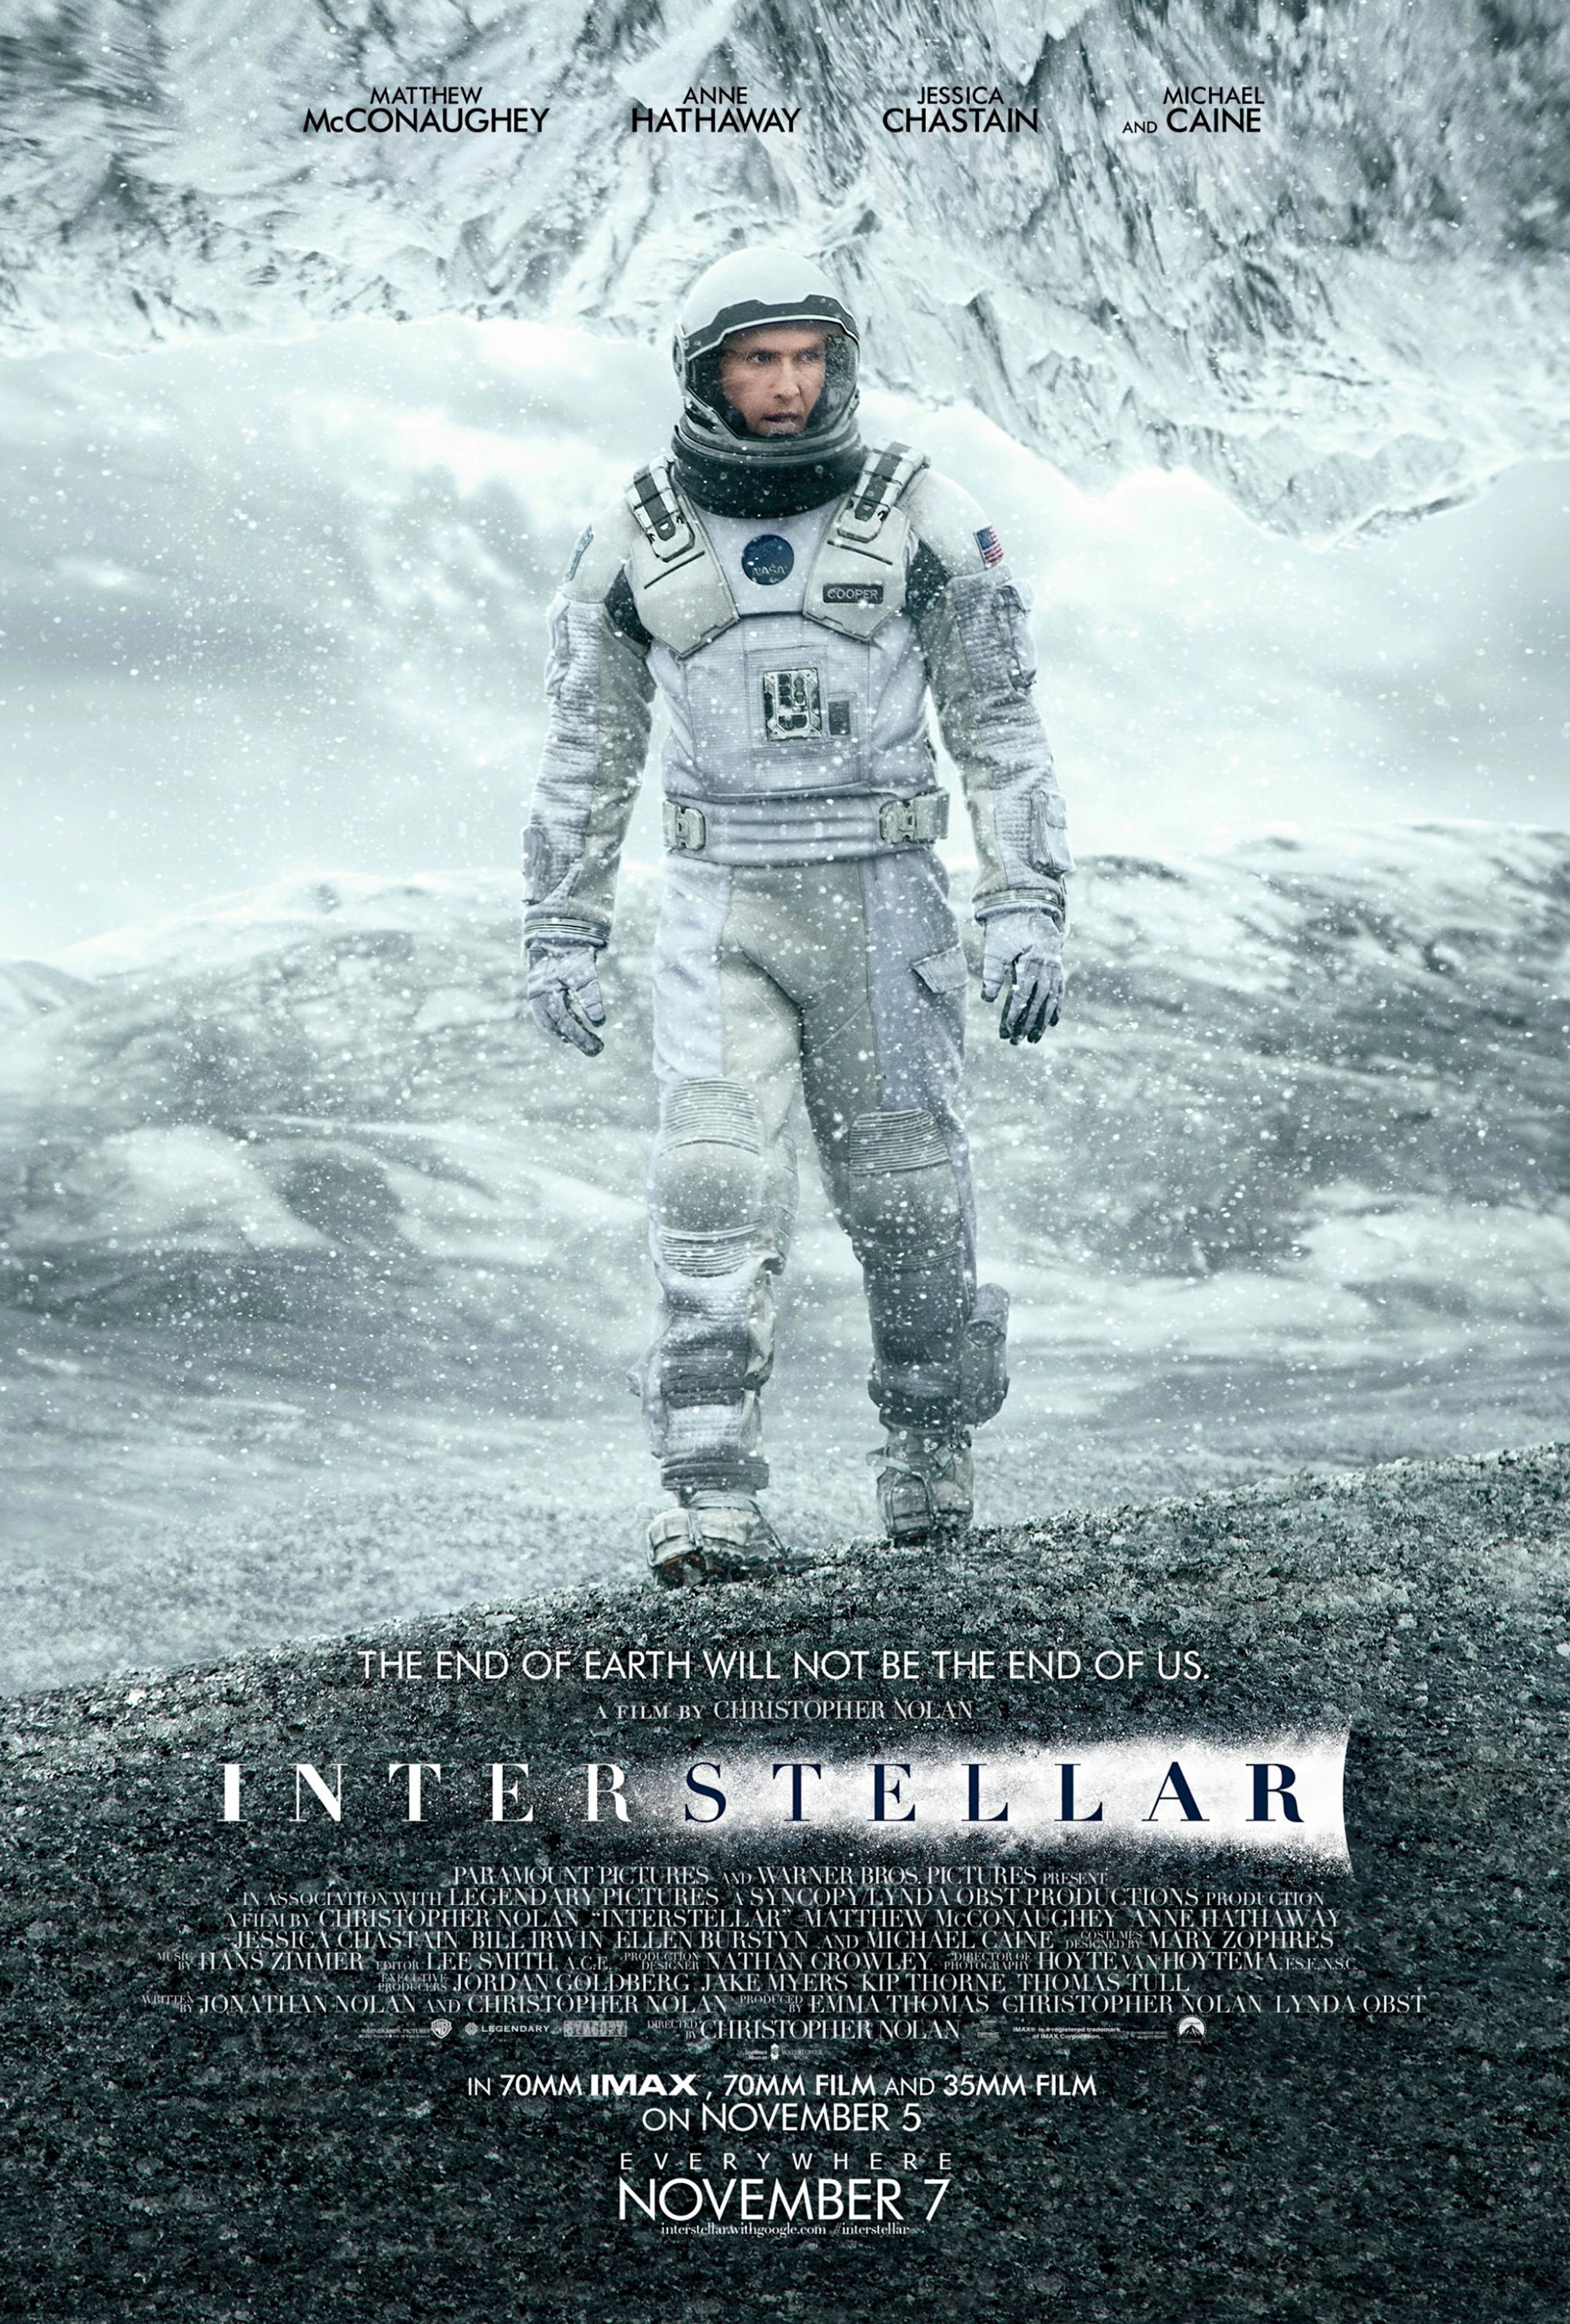 Astronaut Matthew McConaughey stands in the center of a white landscape on the Interstellar movie poster.